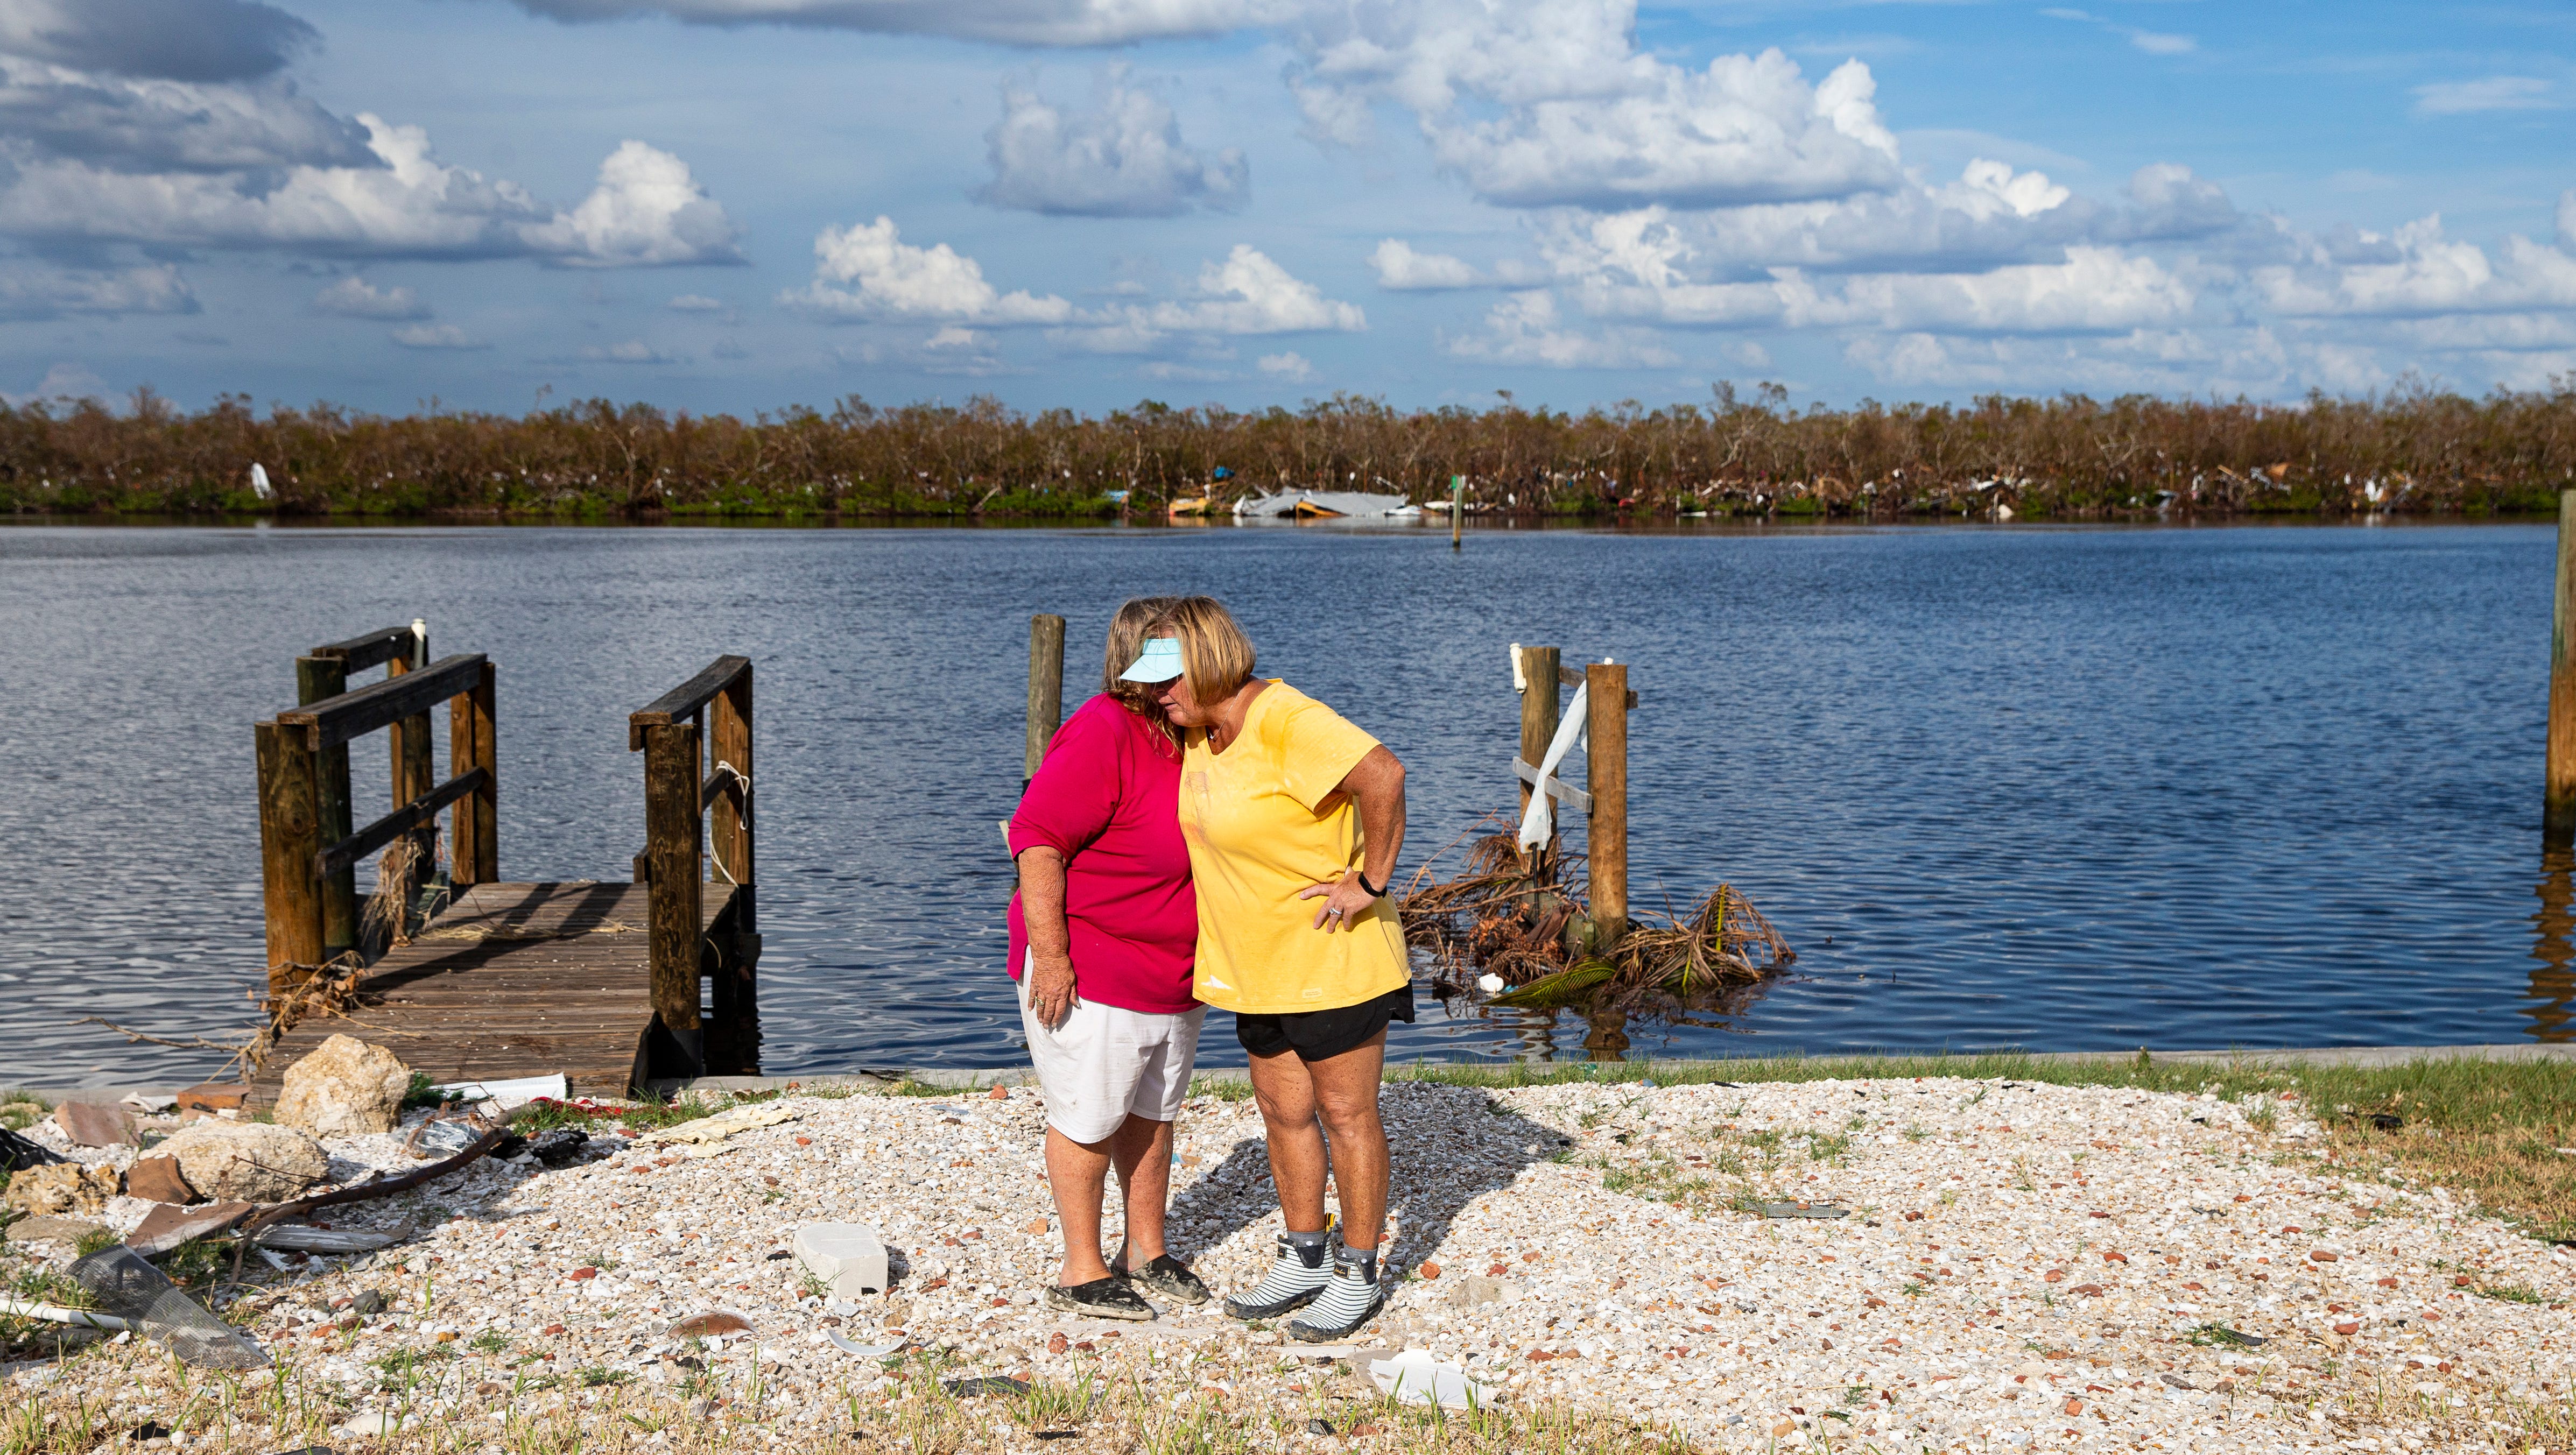 Judi Woods, a resident of Hibiscus Drive on Fort Myers Beach, hugs neighbor Debbie Lemmer after seeing damage to her home for the first time on Oct. 11, 2022. The neighborhood was heavily impacted by Hurricane Ian. Many homes were destroyed and all of them sustained major flooding.